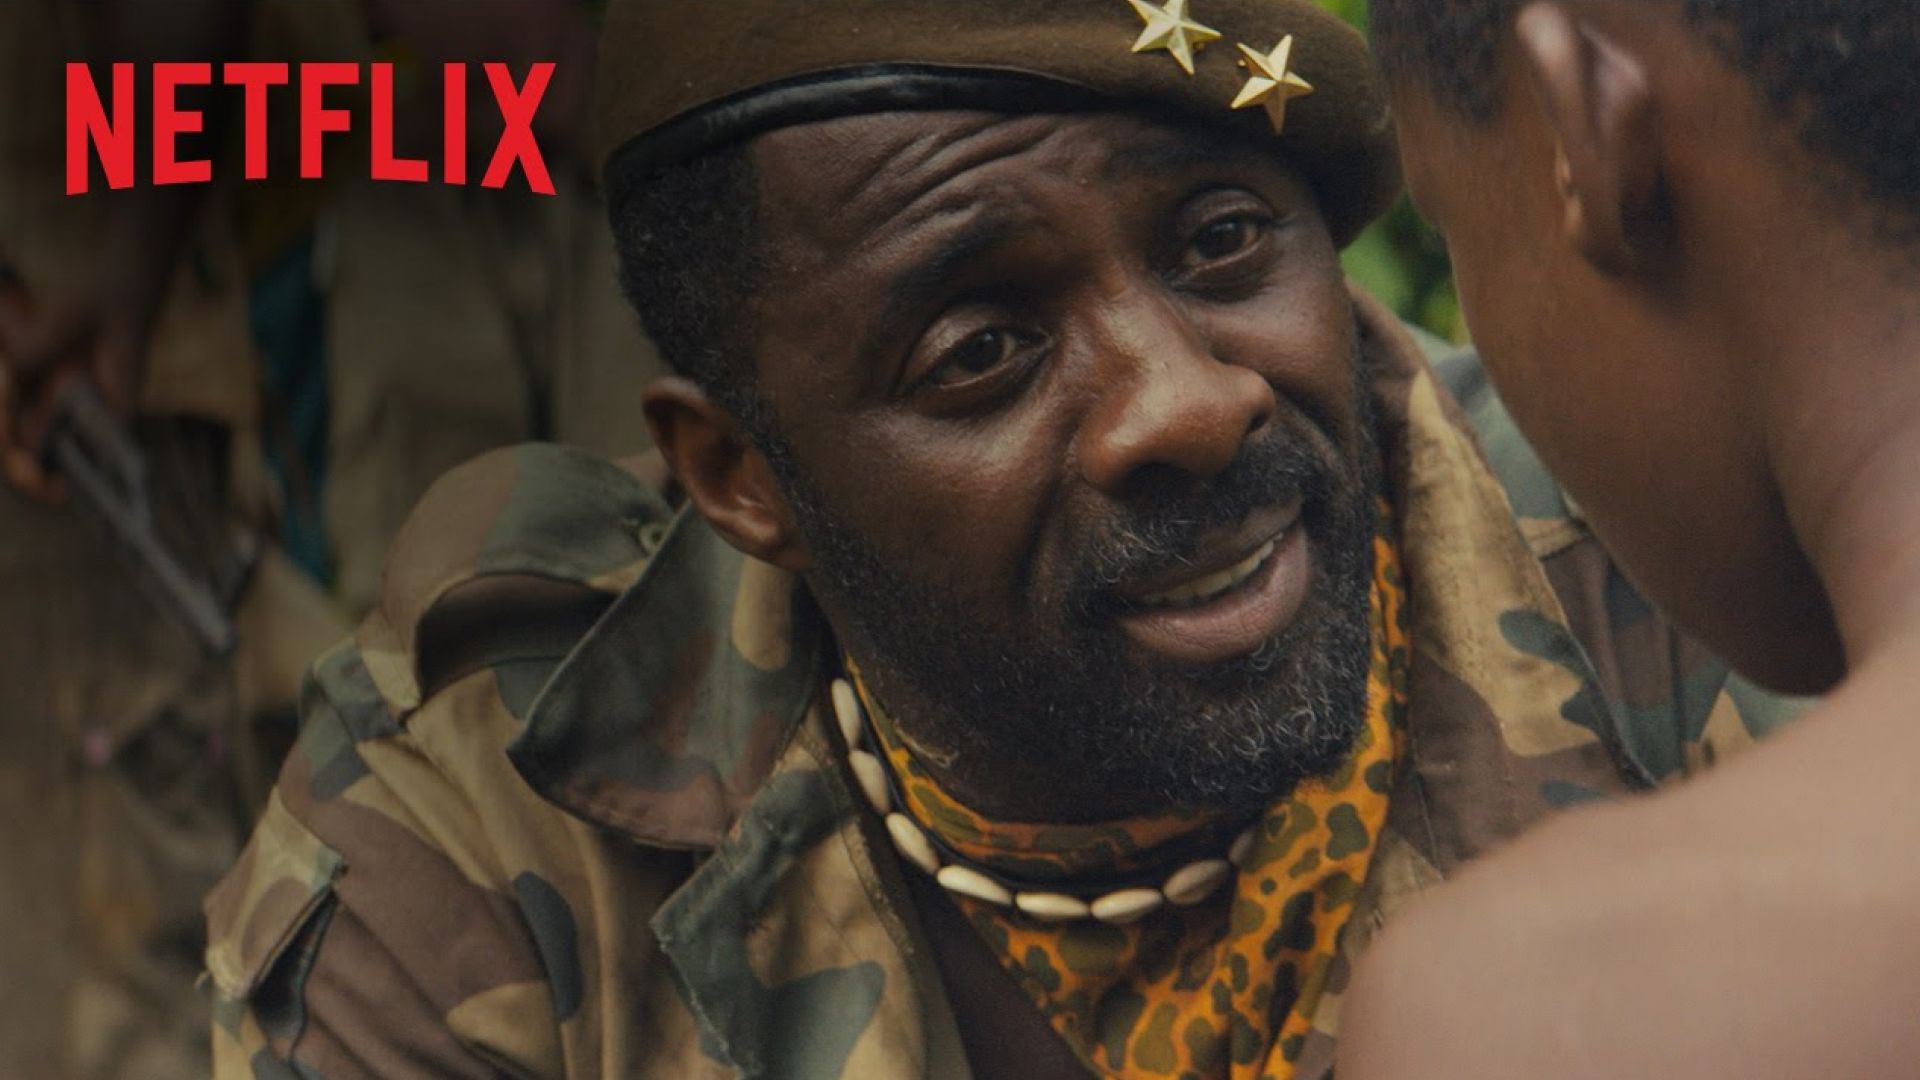 Beasts of No Nation trailer #2